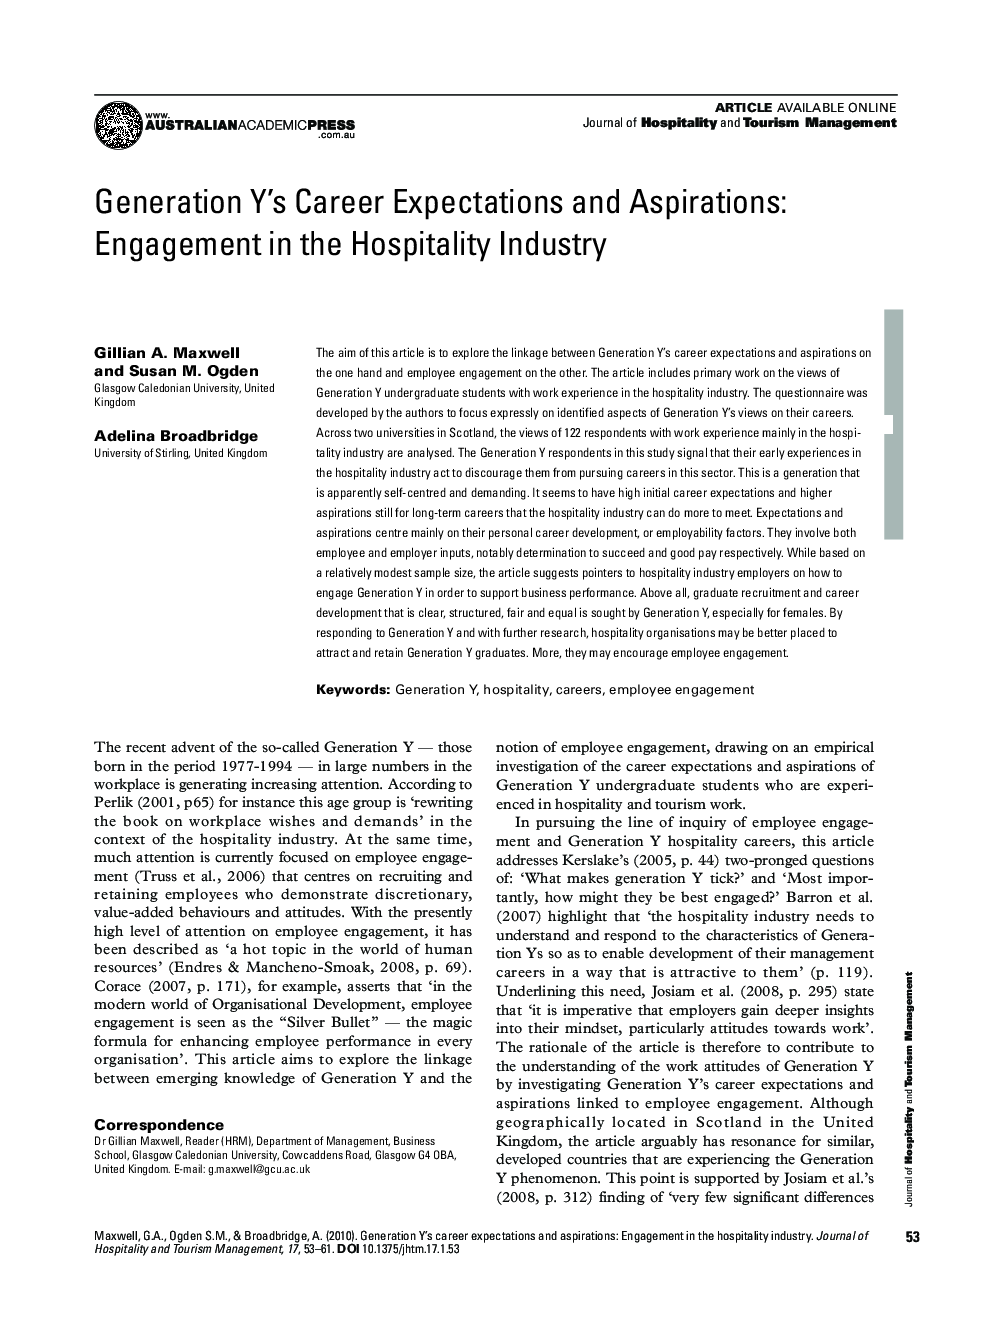 Generation Y's Career Expectations and Aspirations: Engagement in the Hospitality Industry